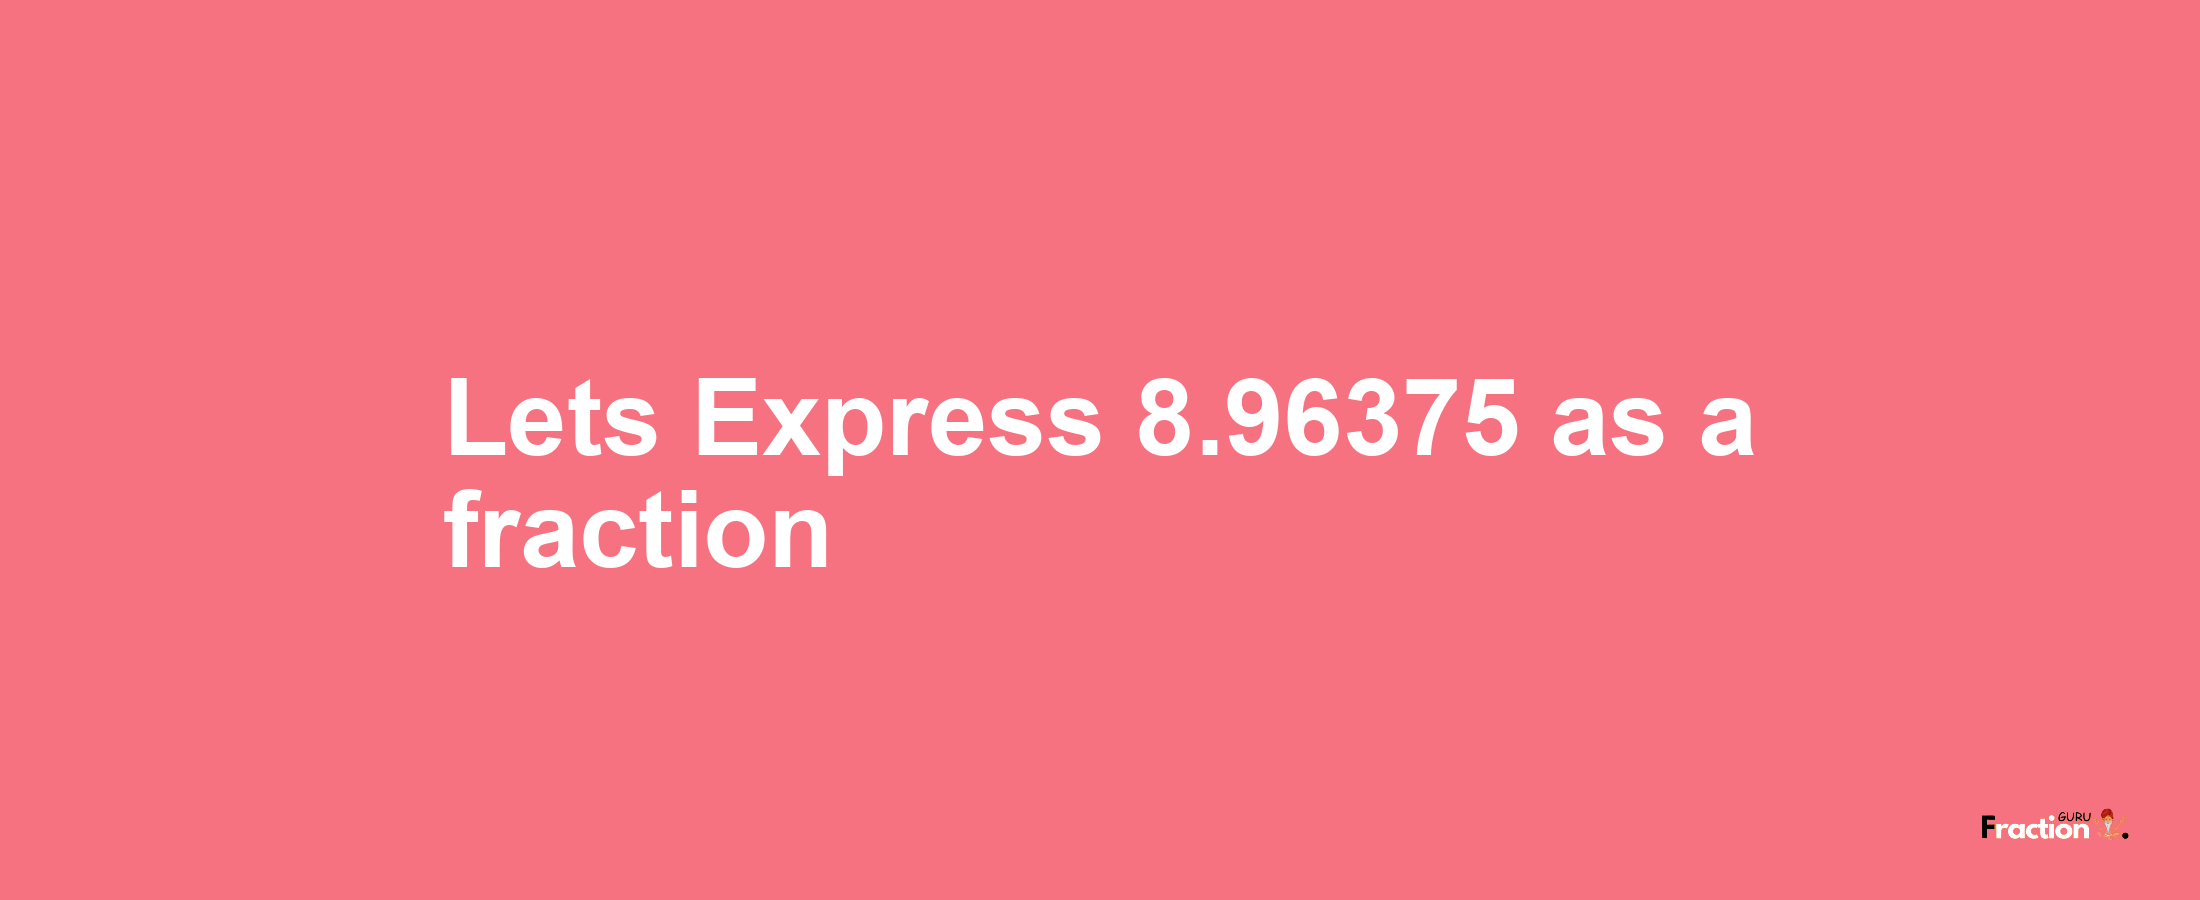 Lets Express 8.96375 as afraction